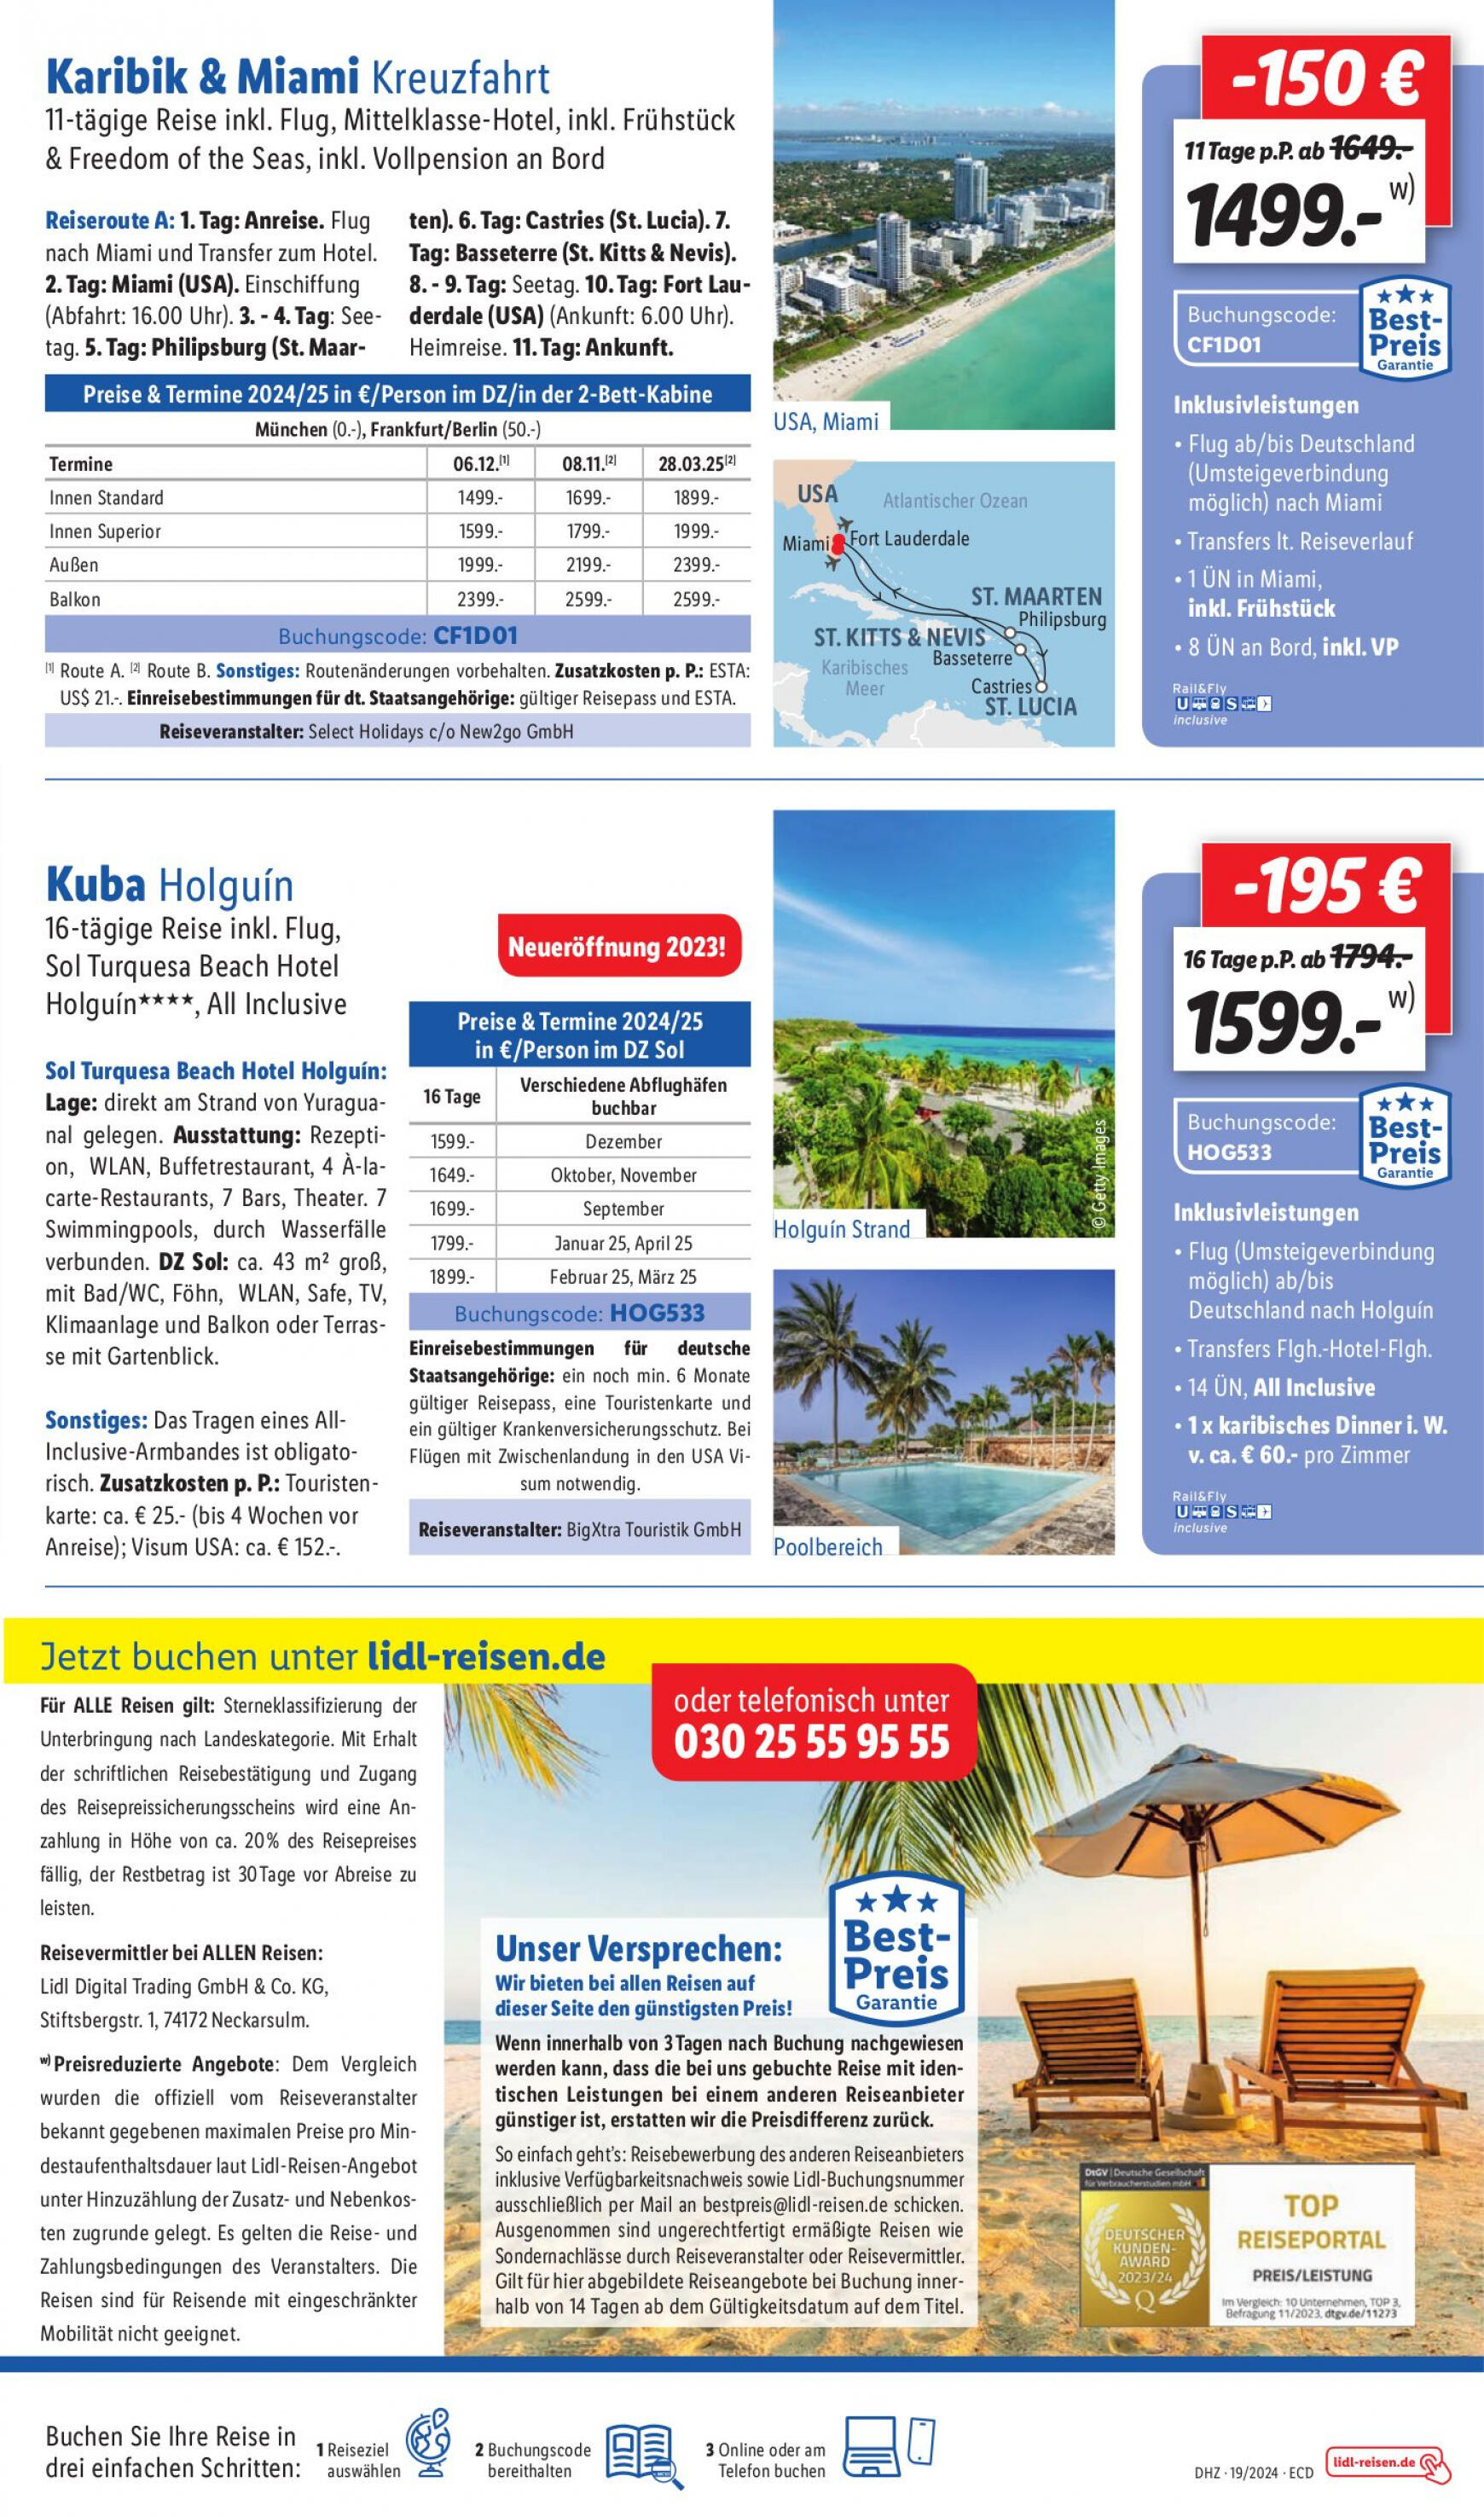 lidl - Flyer Lidl aktuell 06.05. - 11.05. - page: 51